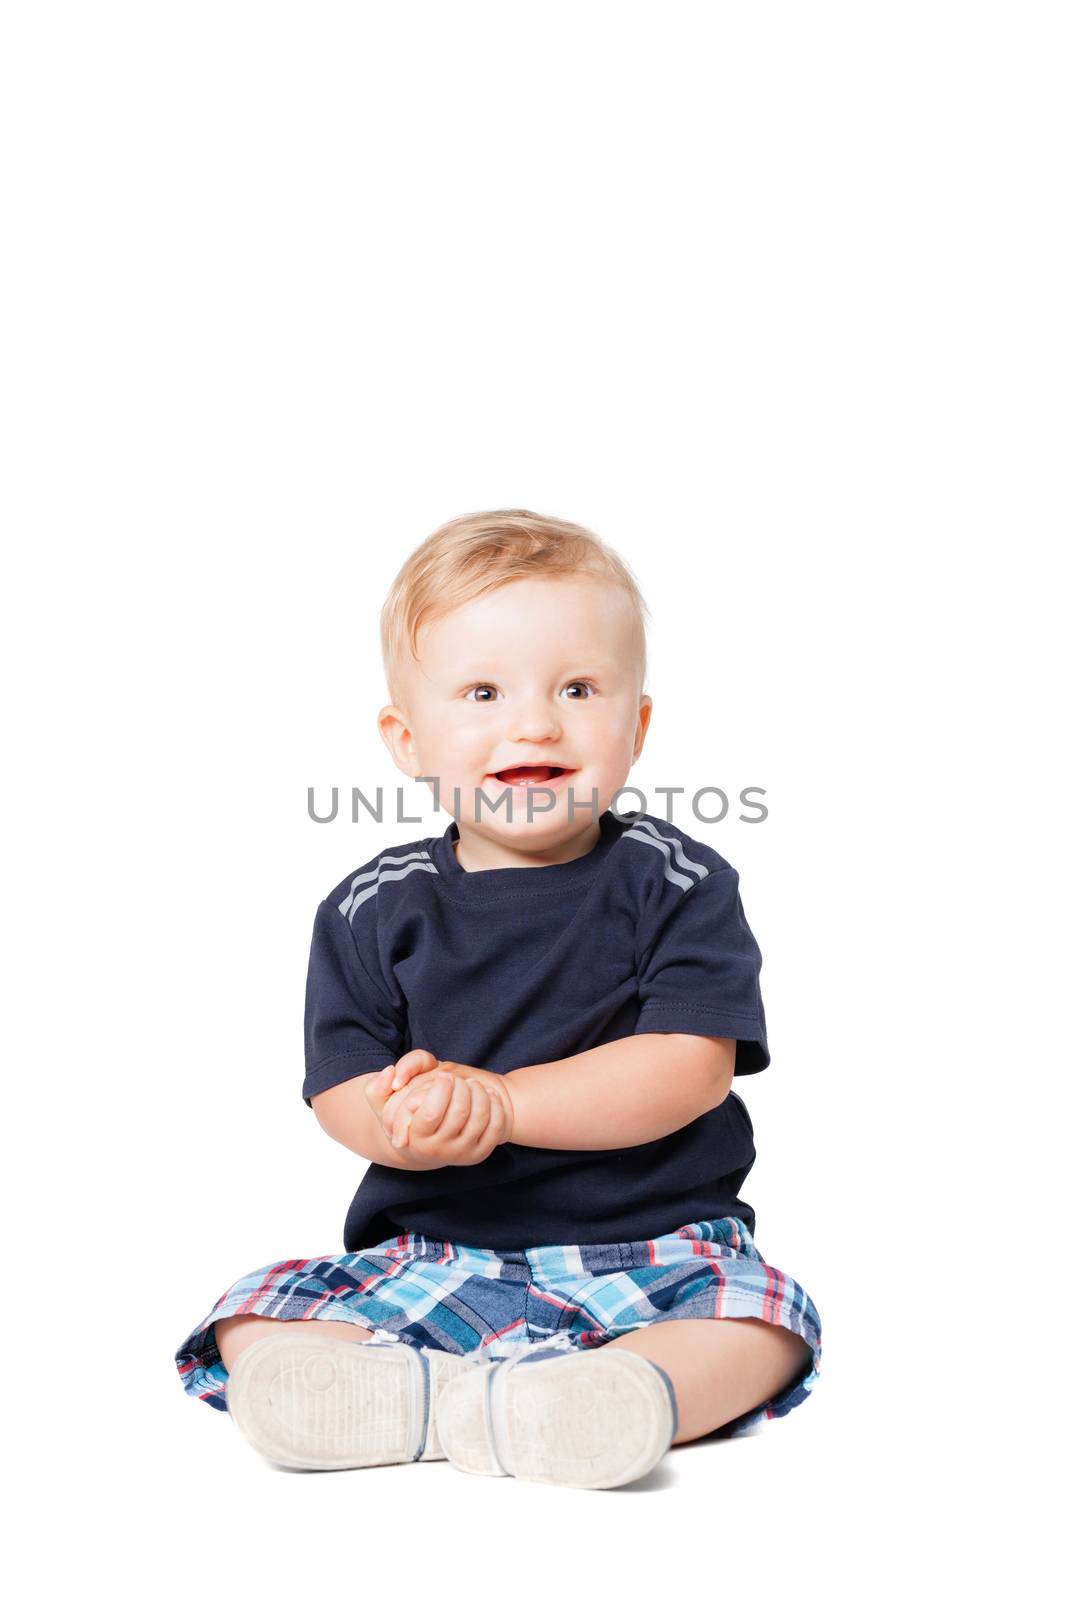 happy baby boy sitting on the floor, isolated on white